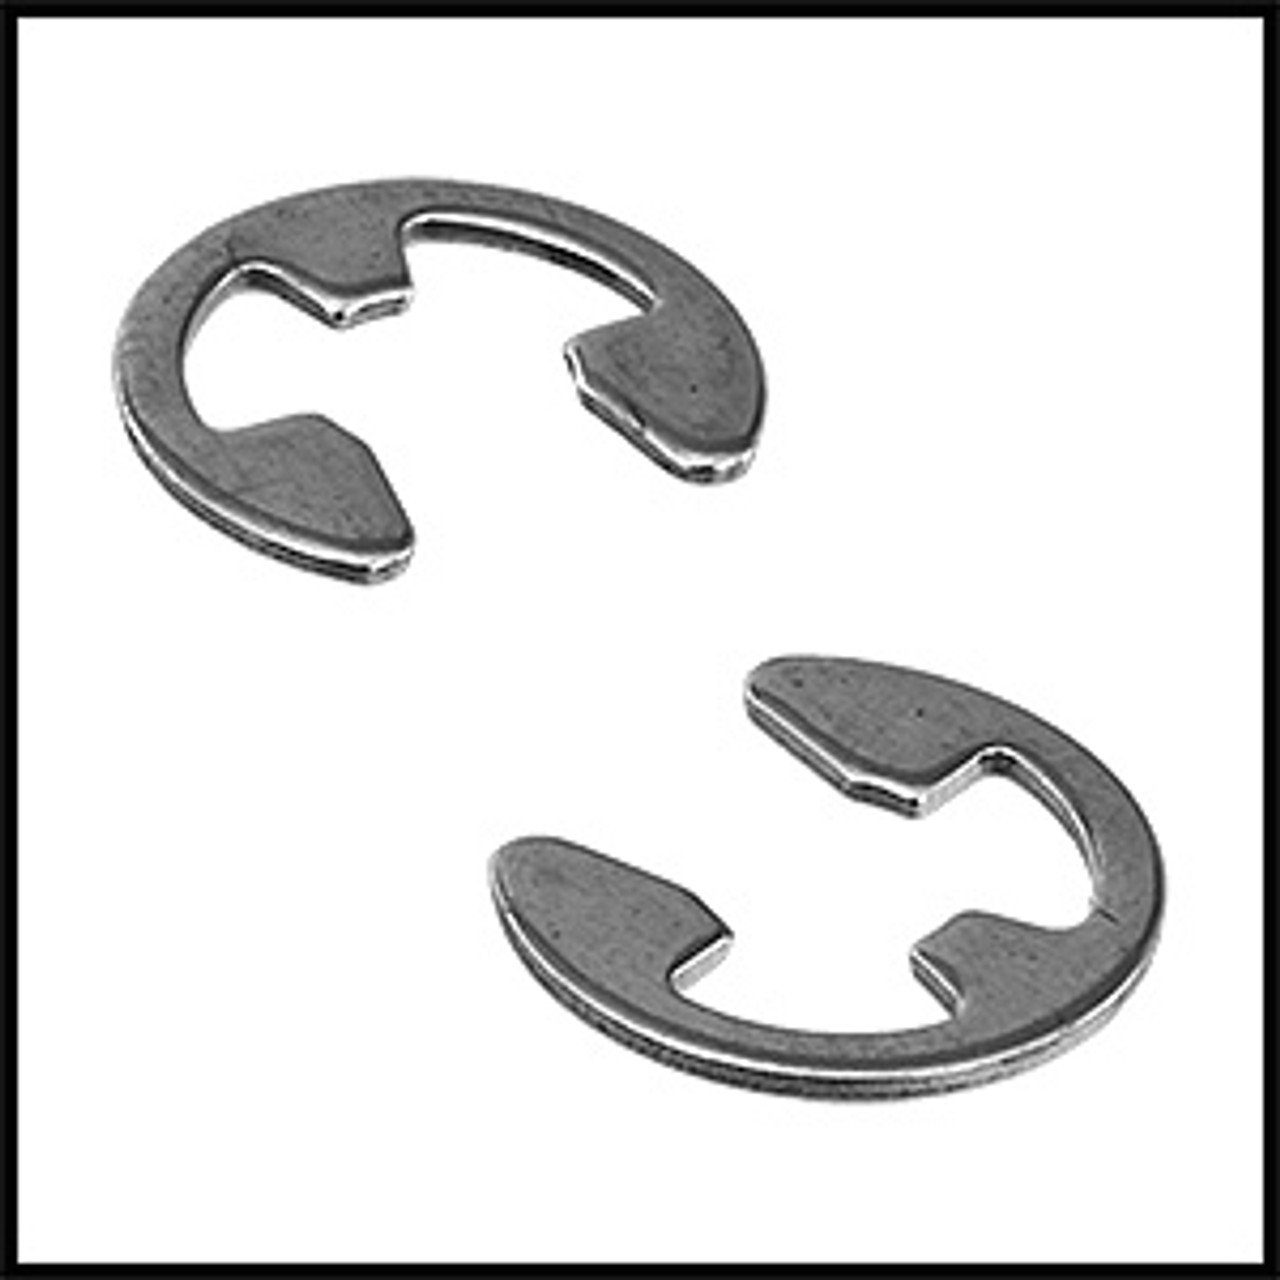 Pentair Letro Stainless Steel E-Clip (Bag Of 2) (#370186)